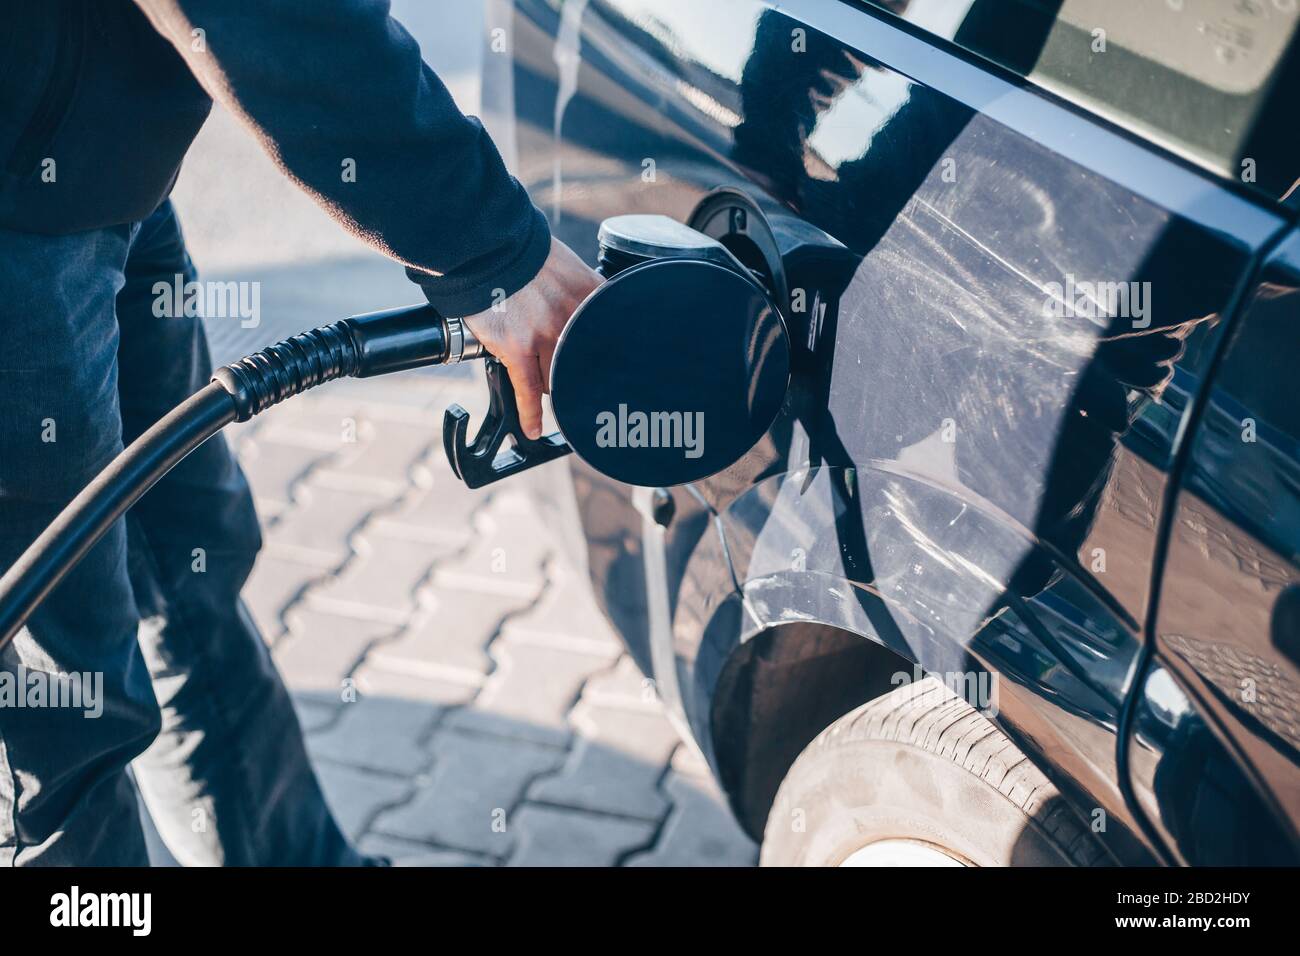 Man refueling a car during low fuel rates, fuel prices, transport concept Stock Photo